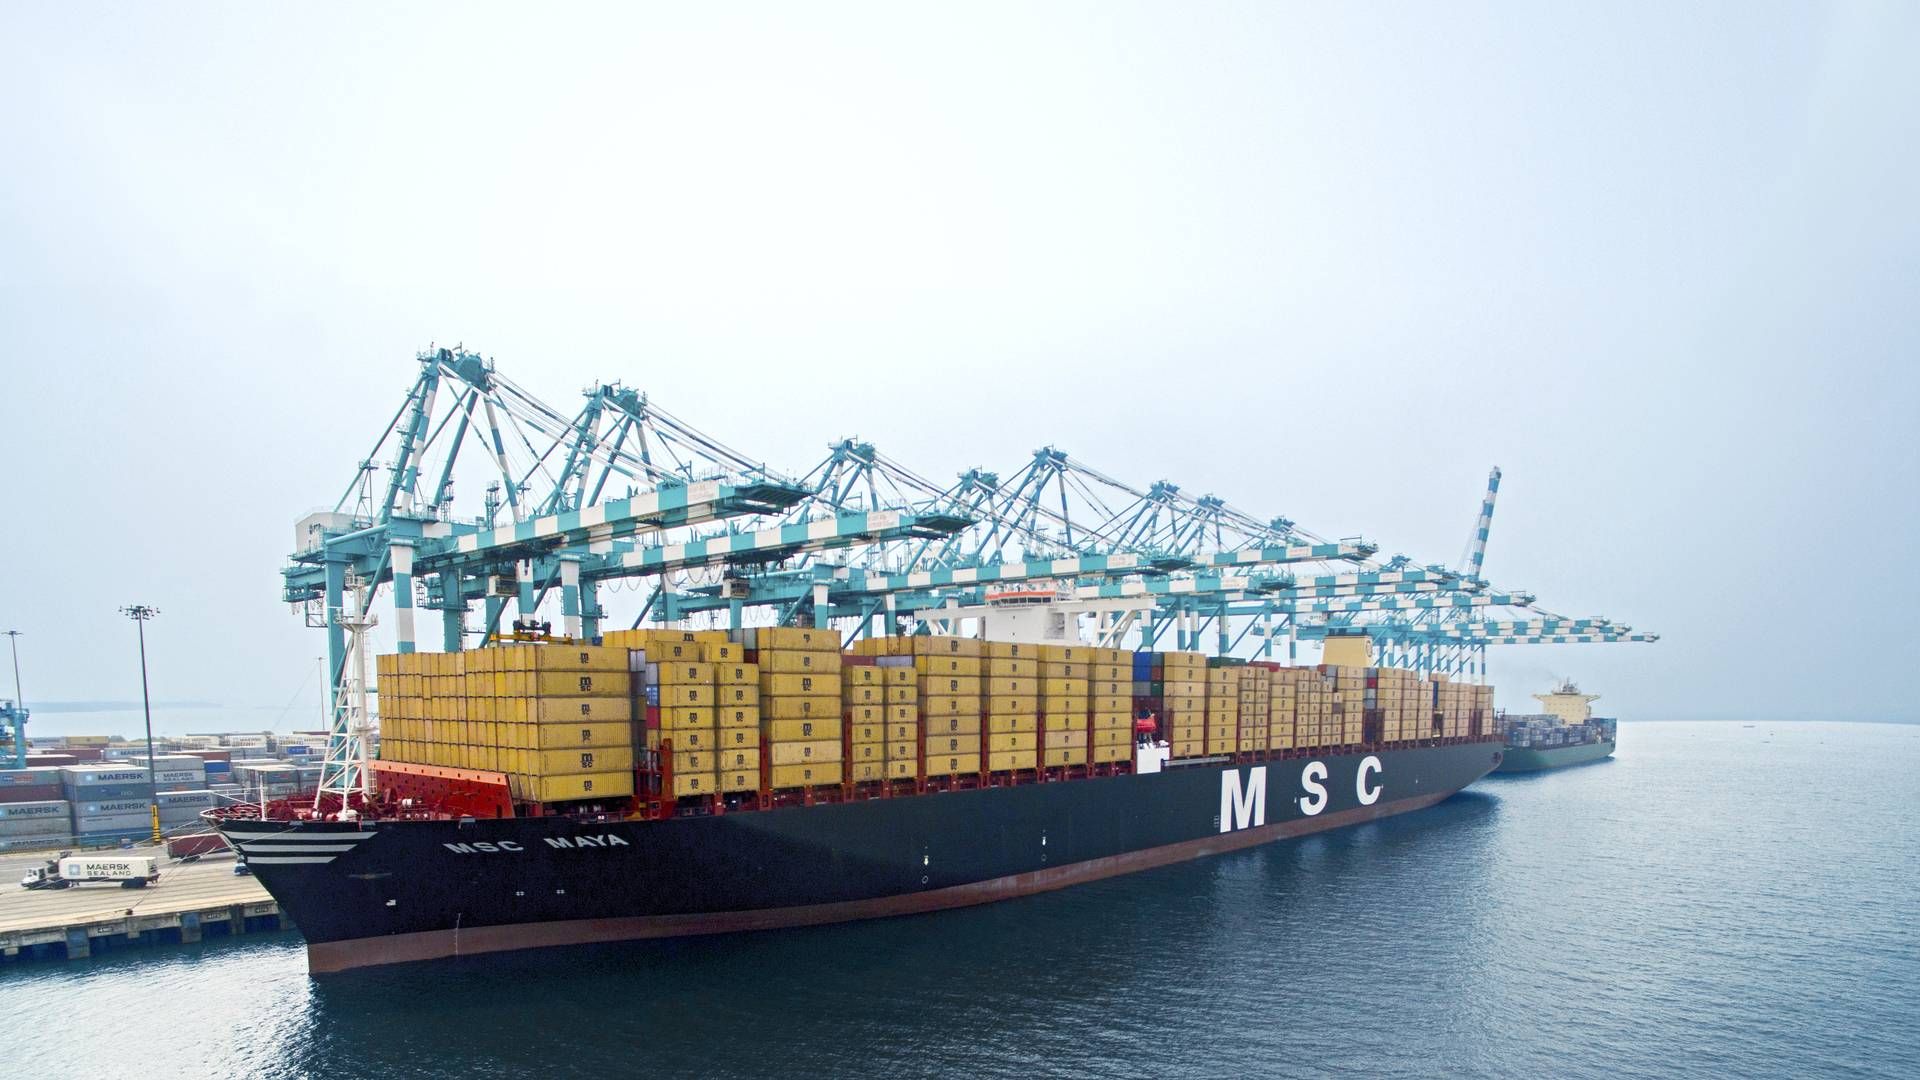 The world's largest container carrier, MSC, currently has 118 ships under construction at shipyards, corresponding to more than a third of the existing fleet. | Photo: PR / MSC